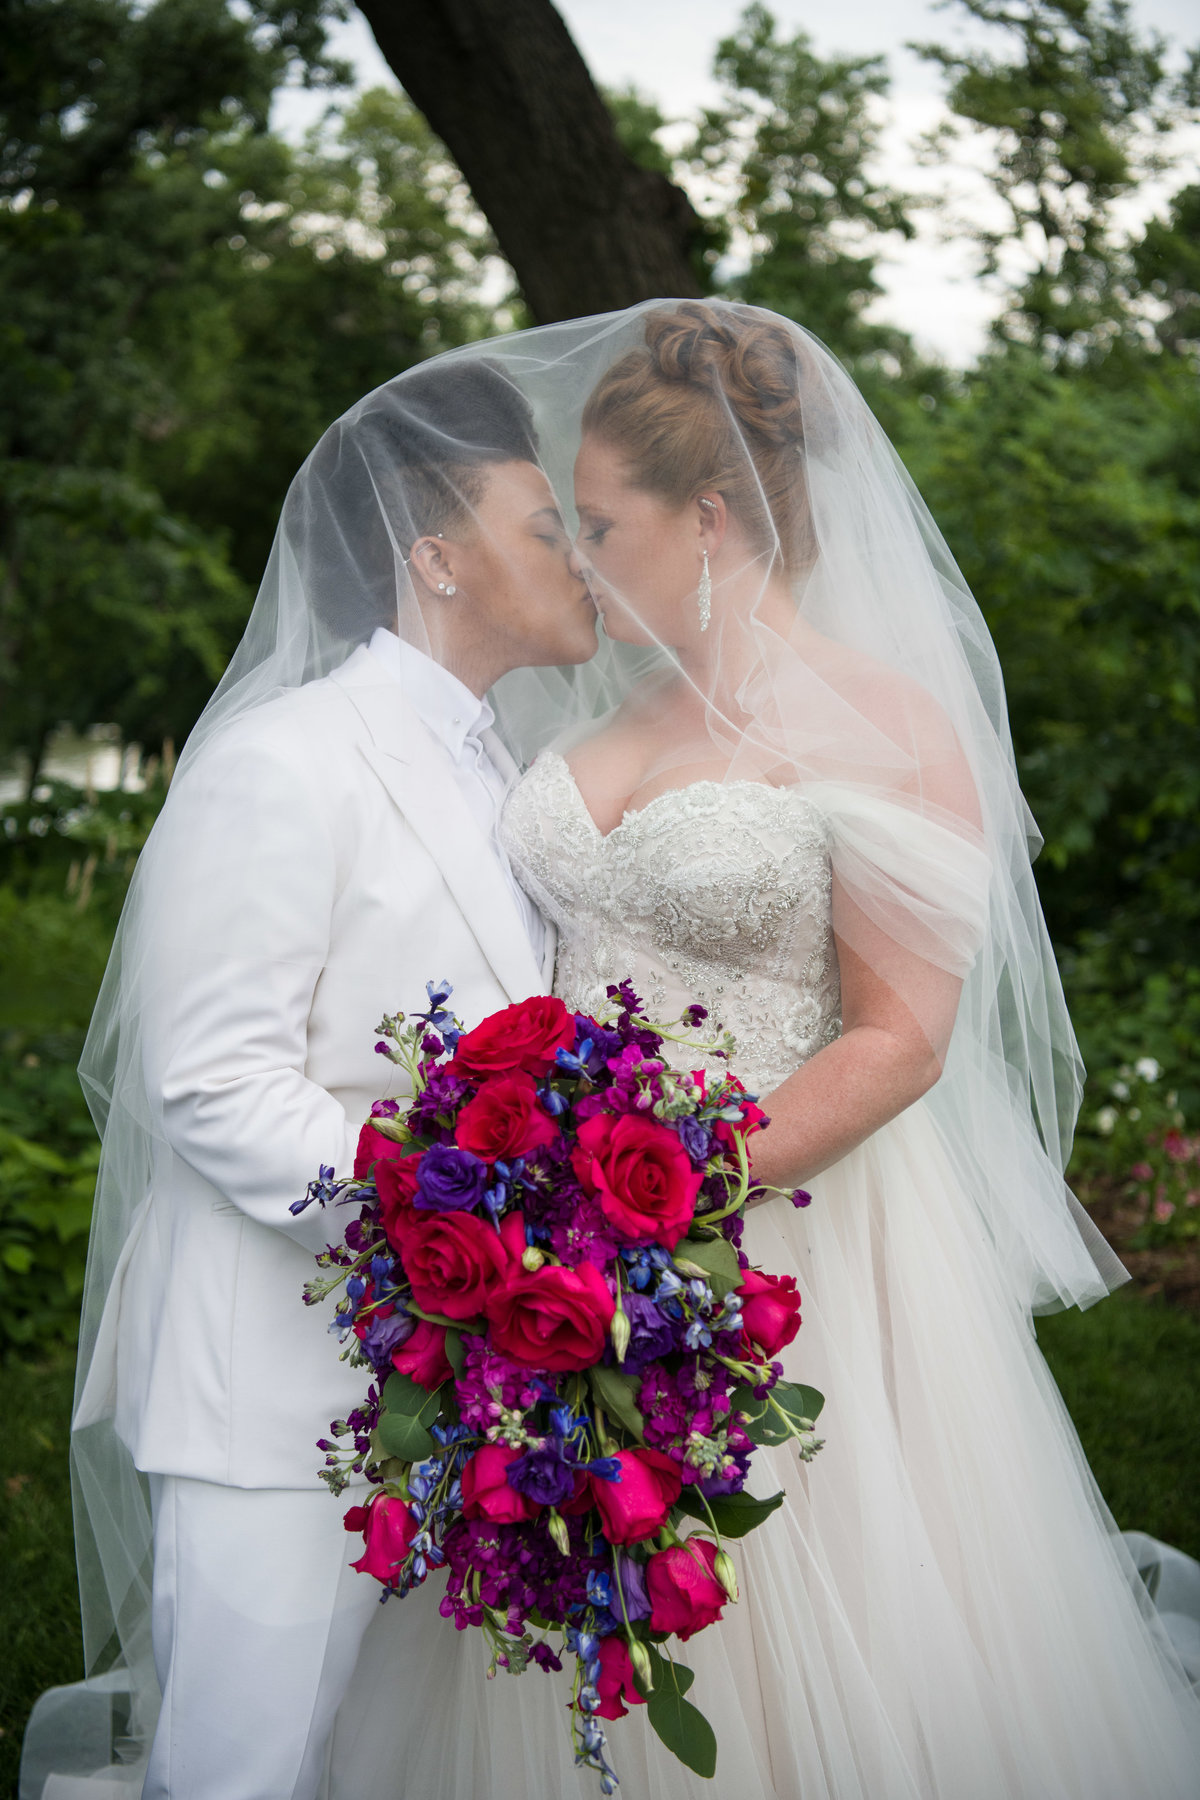 Brides kiss under veil while holding roses.